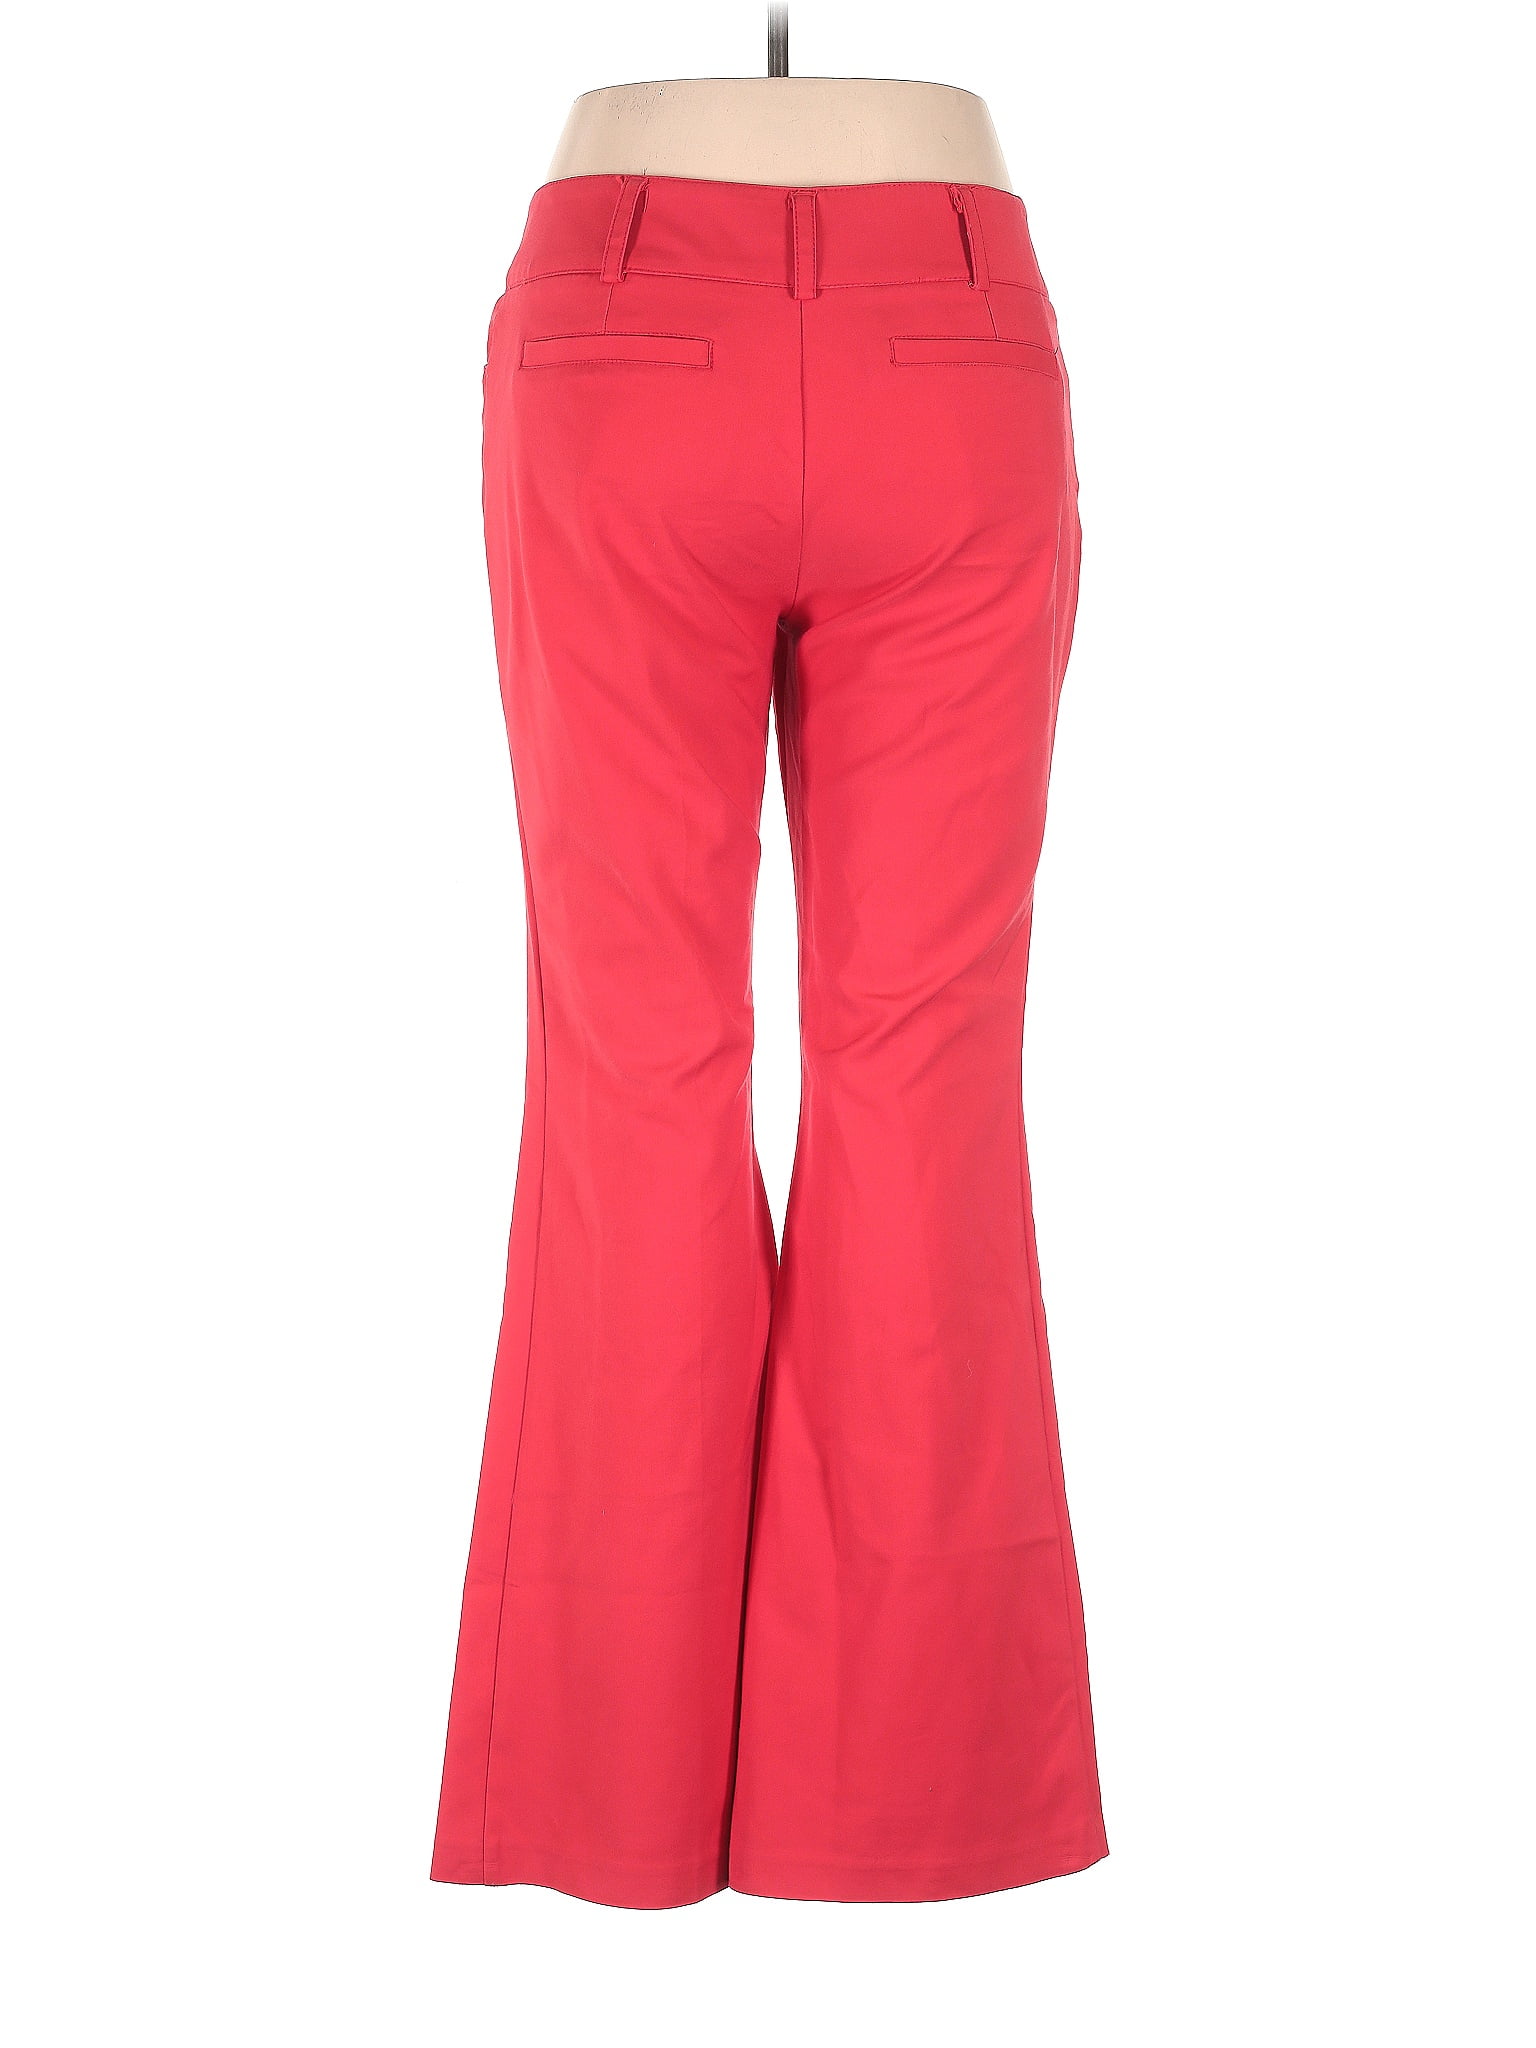 7th Avenue Design Studio New York & Company Solid Red Casual Pants Size 10  - 75% off